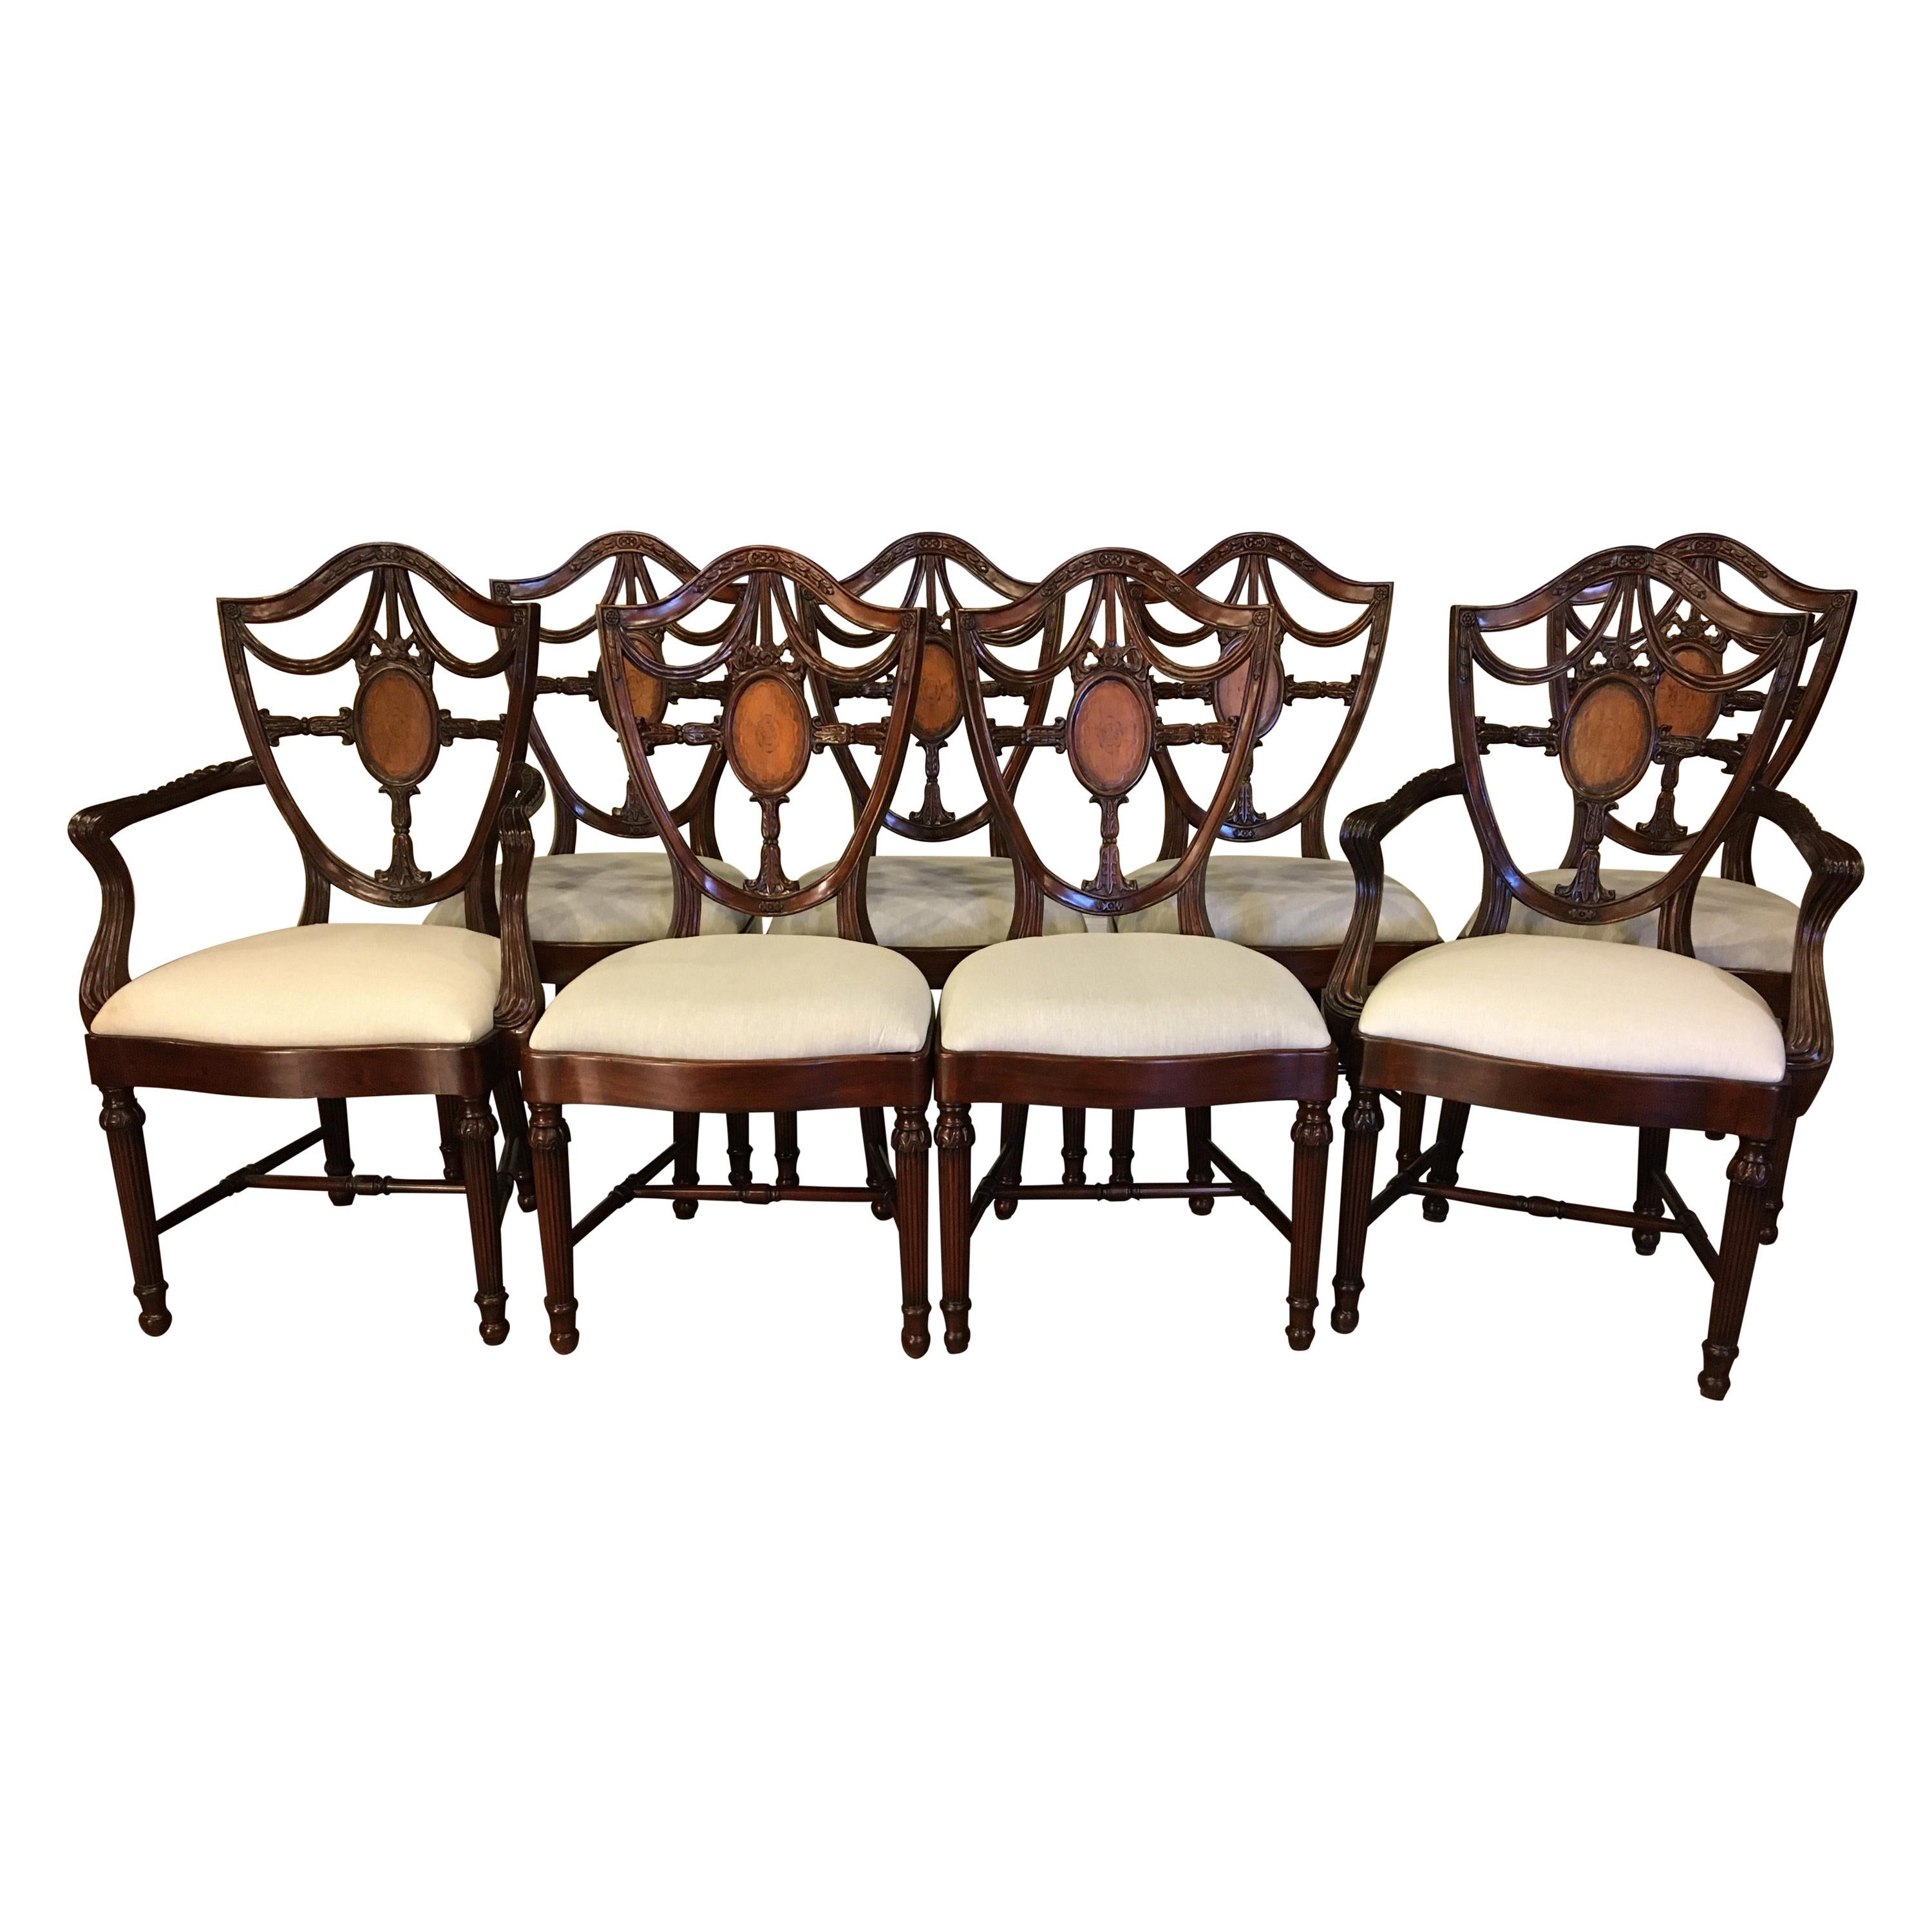 Eight New Traditional Mahogany Inlaid Shieldback Dining Chairs by Leighton Hall